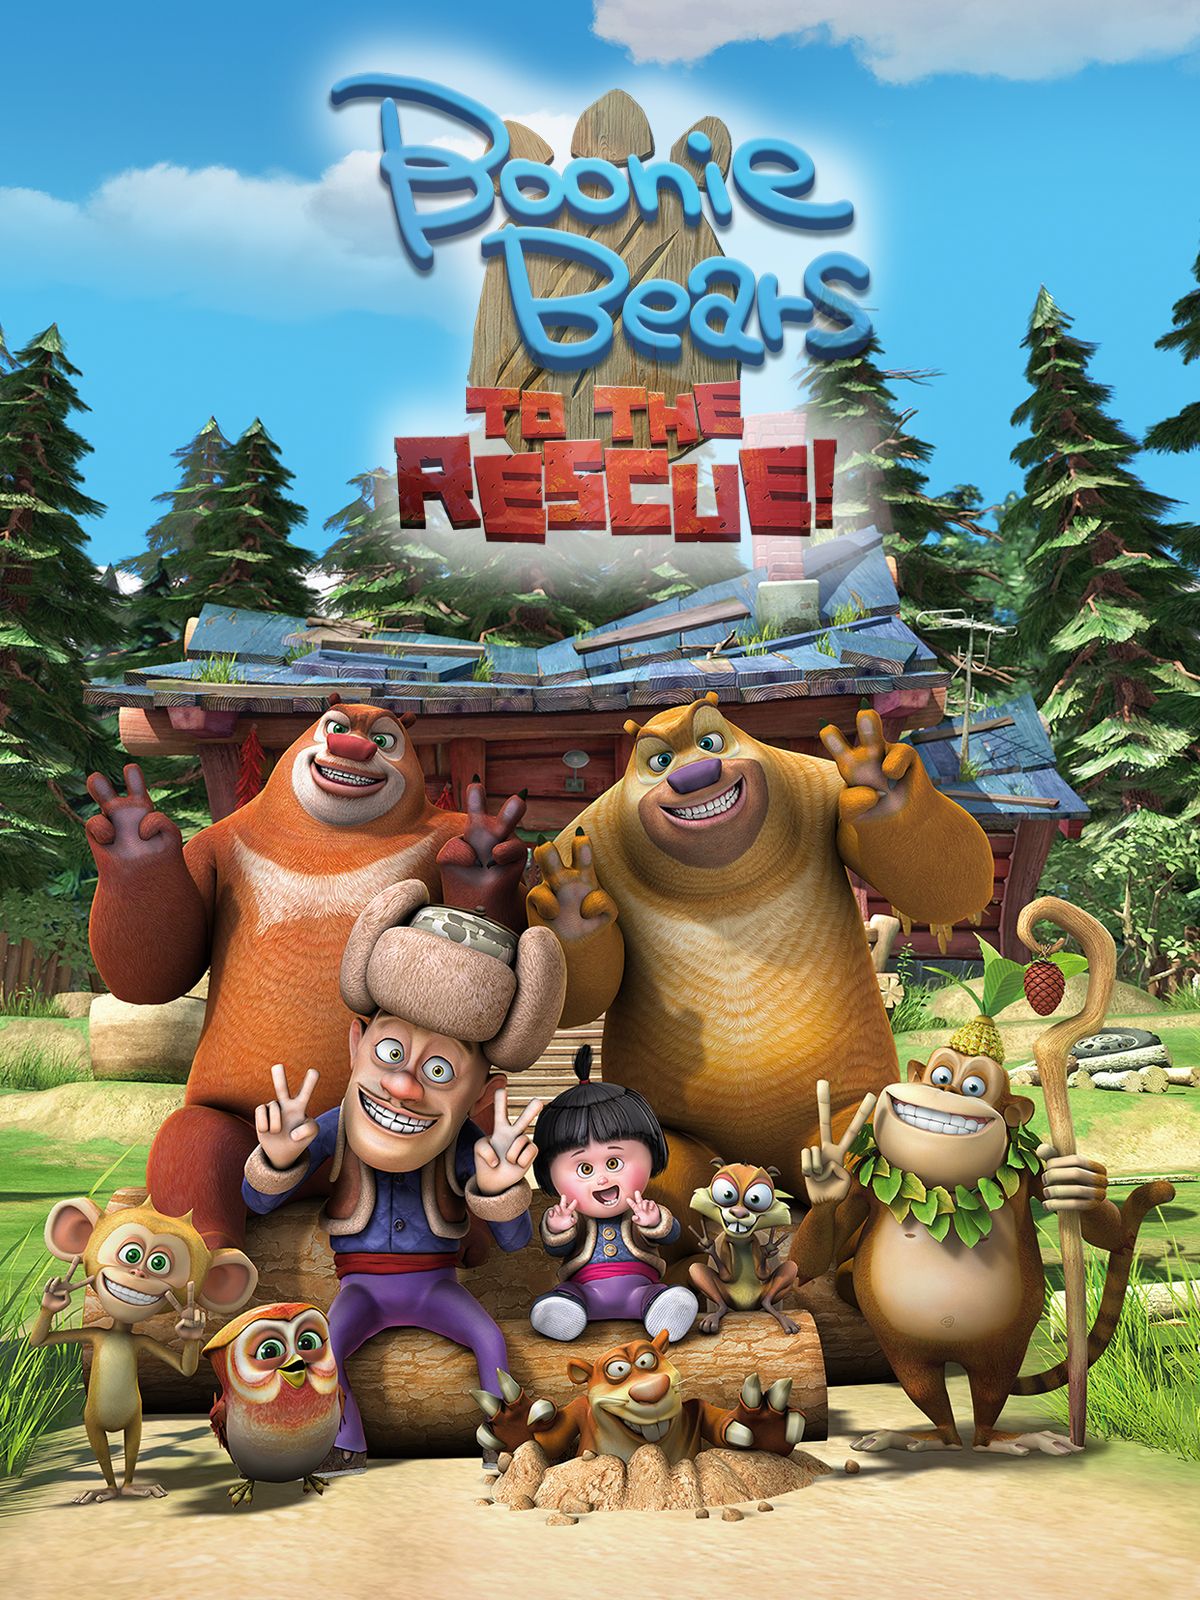 Vision Films Presents Boonie Bears: To the Rescue! on DVD This